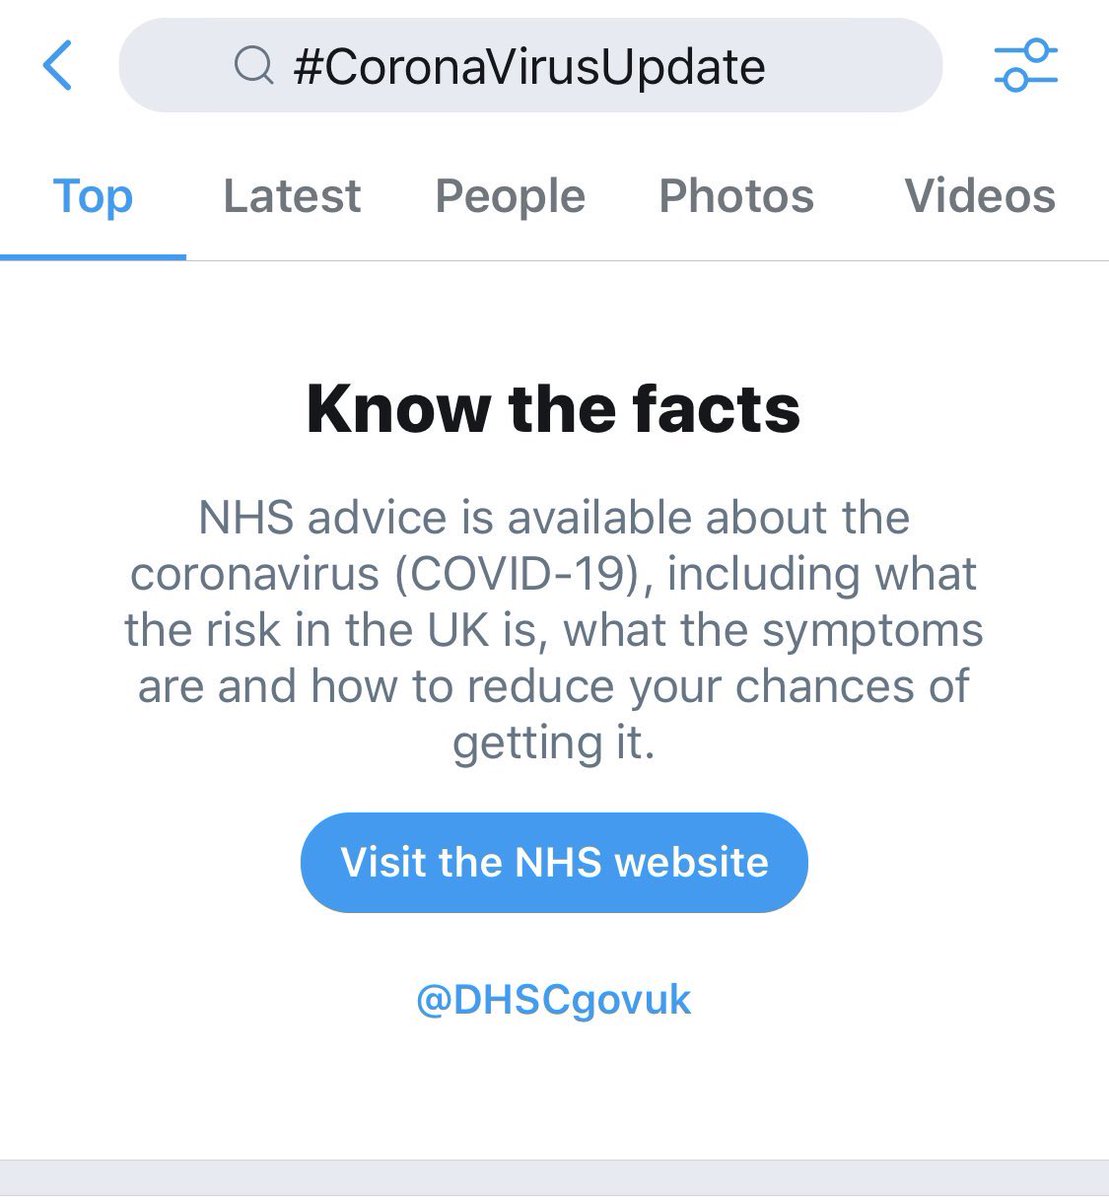 Next up:  @Twitter.I use Twitter a lot and haven’t come across any posts appearing organically in my newsfeed. However, if you search for “coronavirus” or a related hashtag, there’s a pinned message linking to the  @DHSCgovuk website.